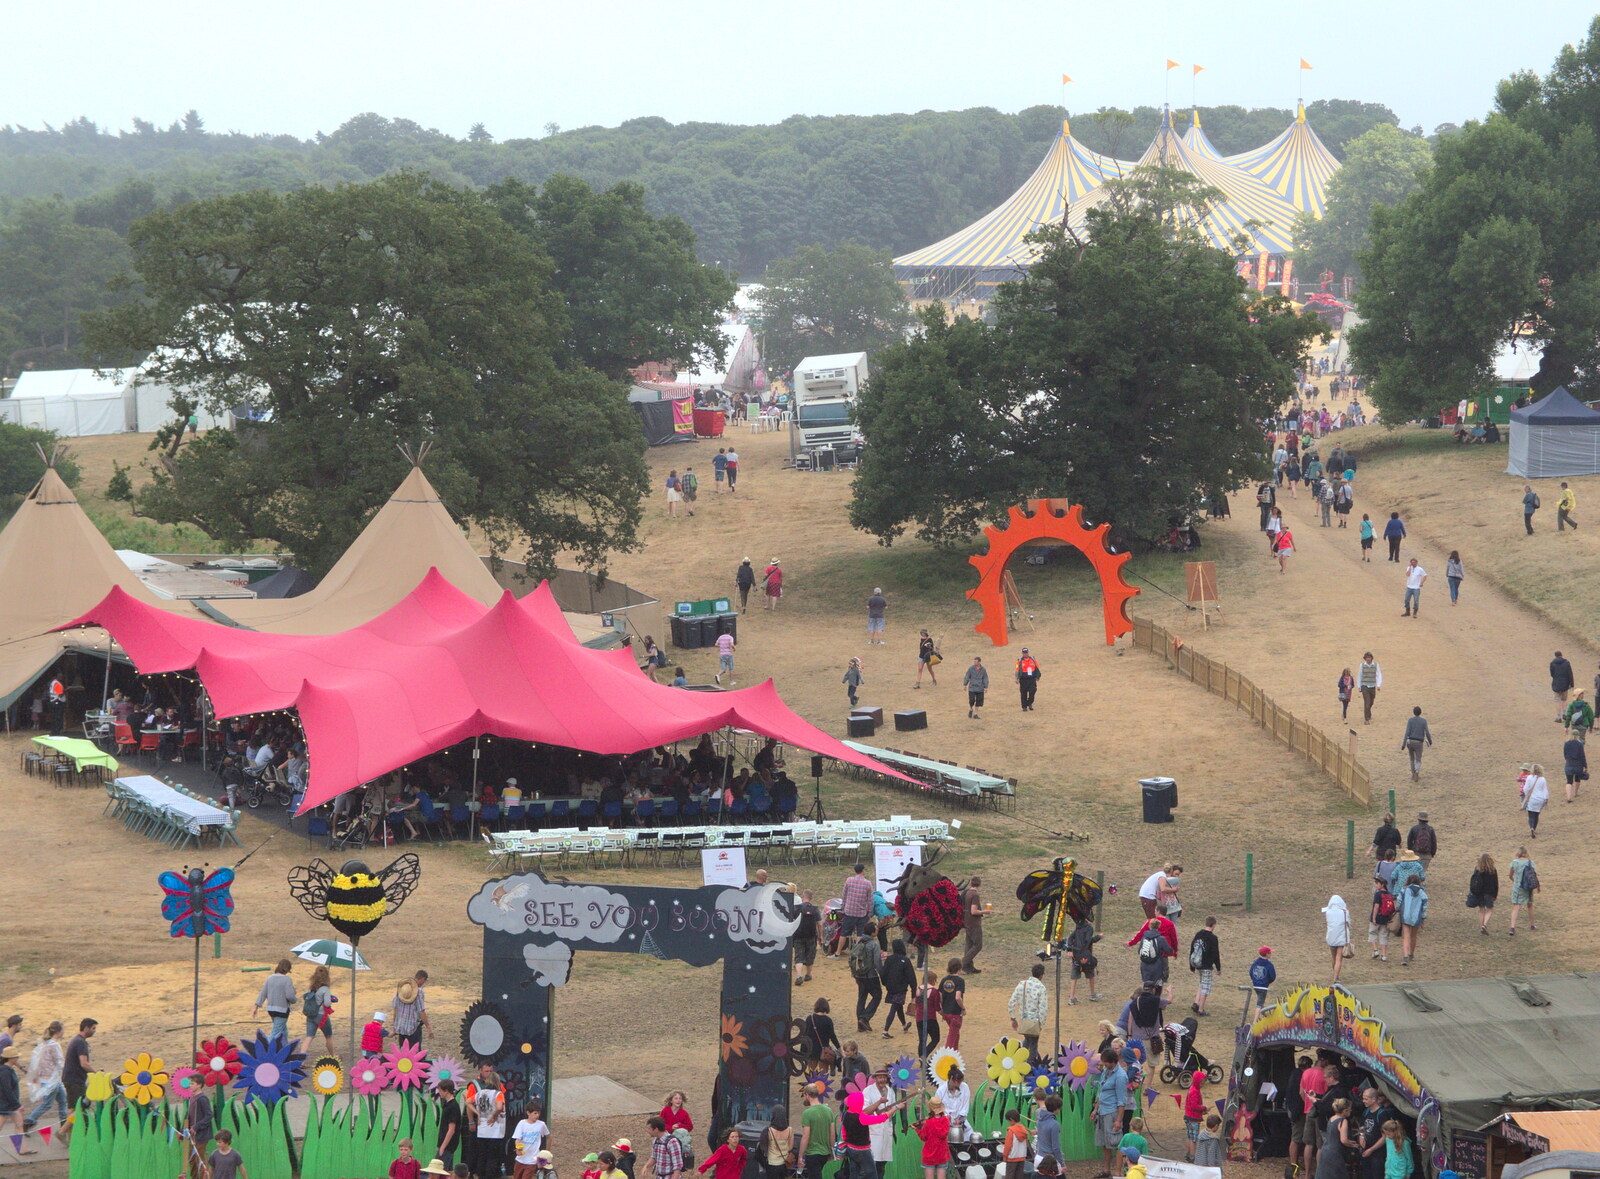 A view from the top from The 8th Latitude Festival, Henham Park, Southwold, Suffolk - 18th July 2013